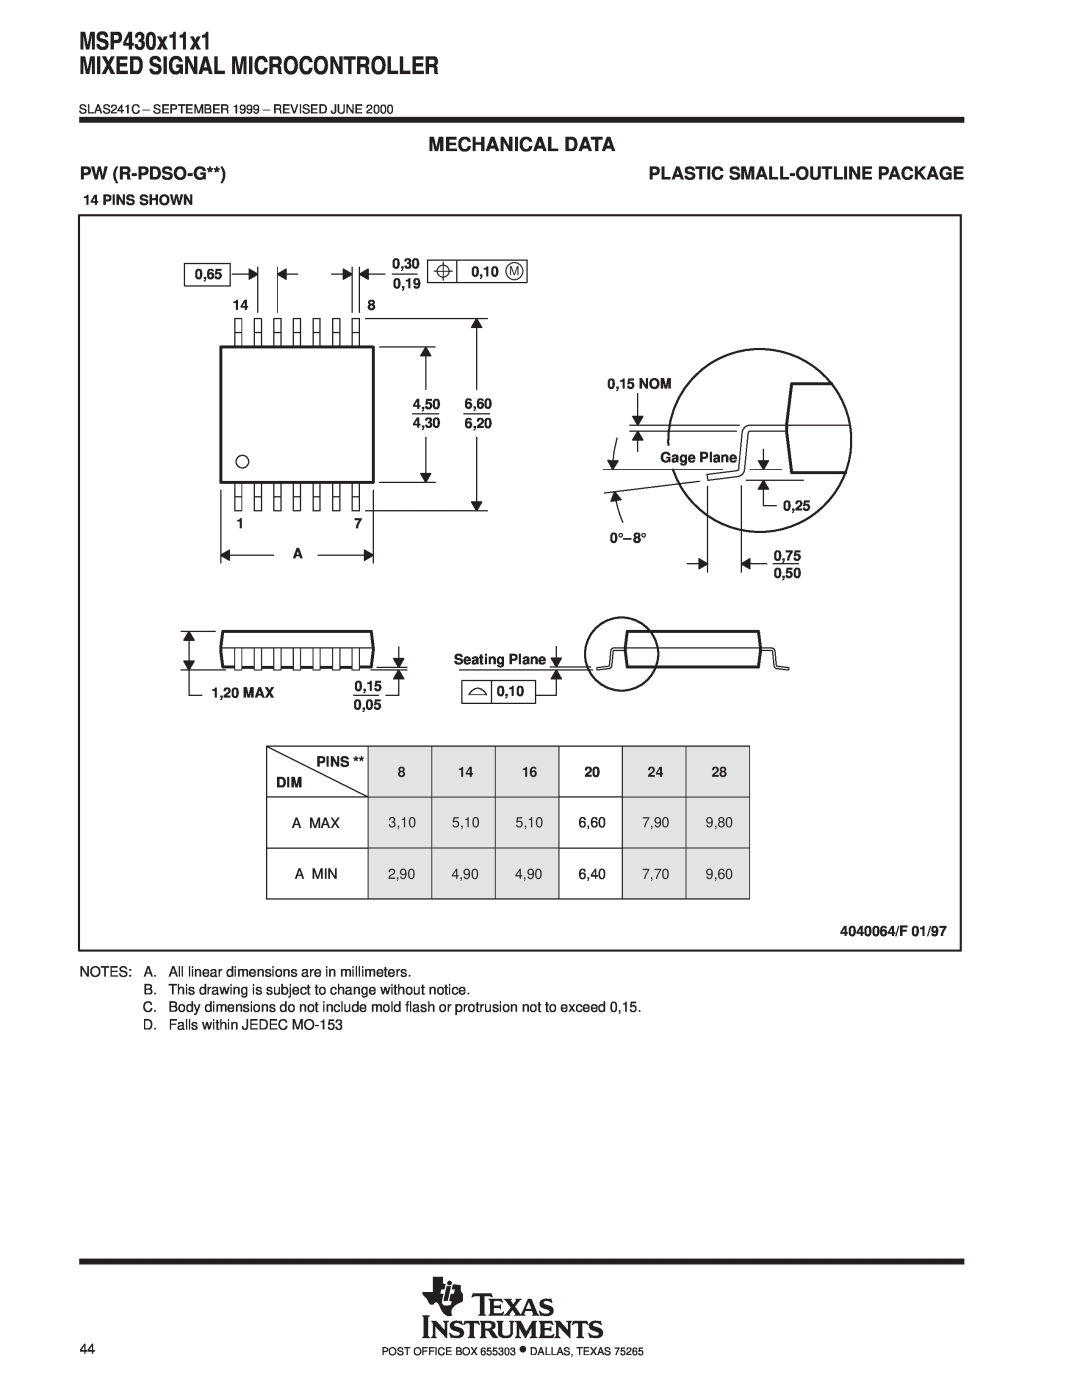 Texas Instruments Pw R-Pdso-G, Plastic Small-Outline Package, MSP430x11x1 MIXED SIGNAL MICROCONTROLLER, Mechanical Data 